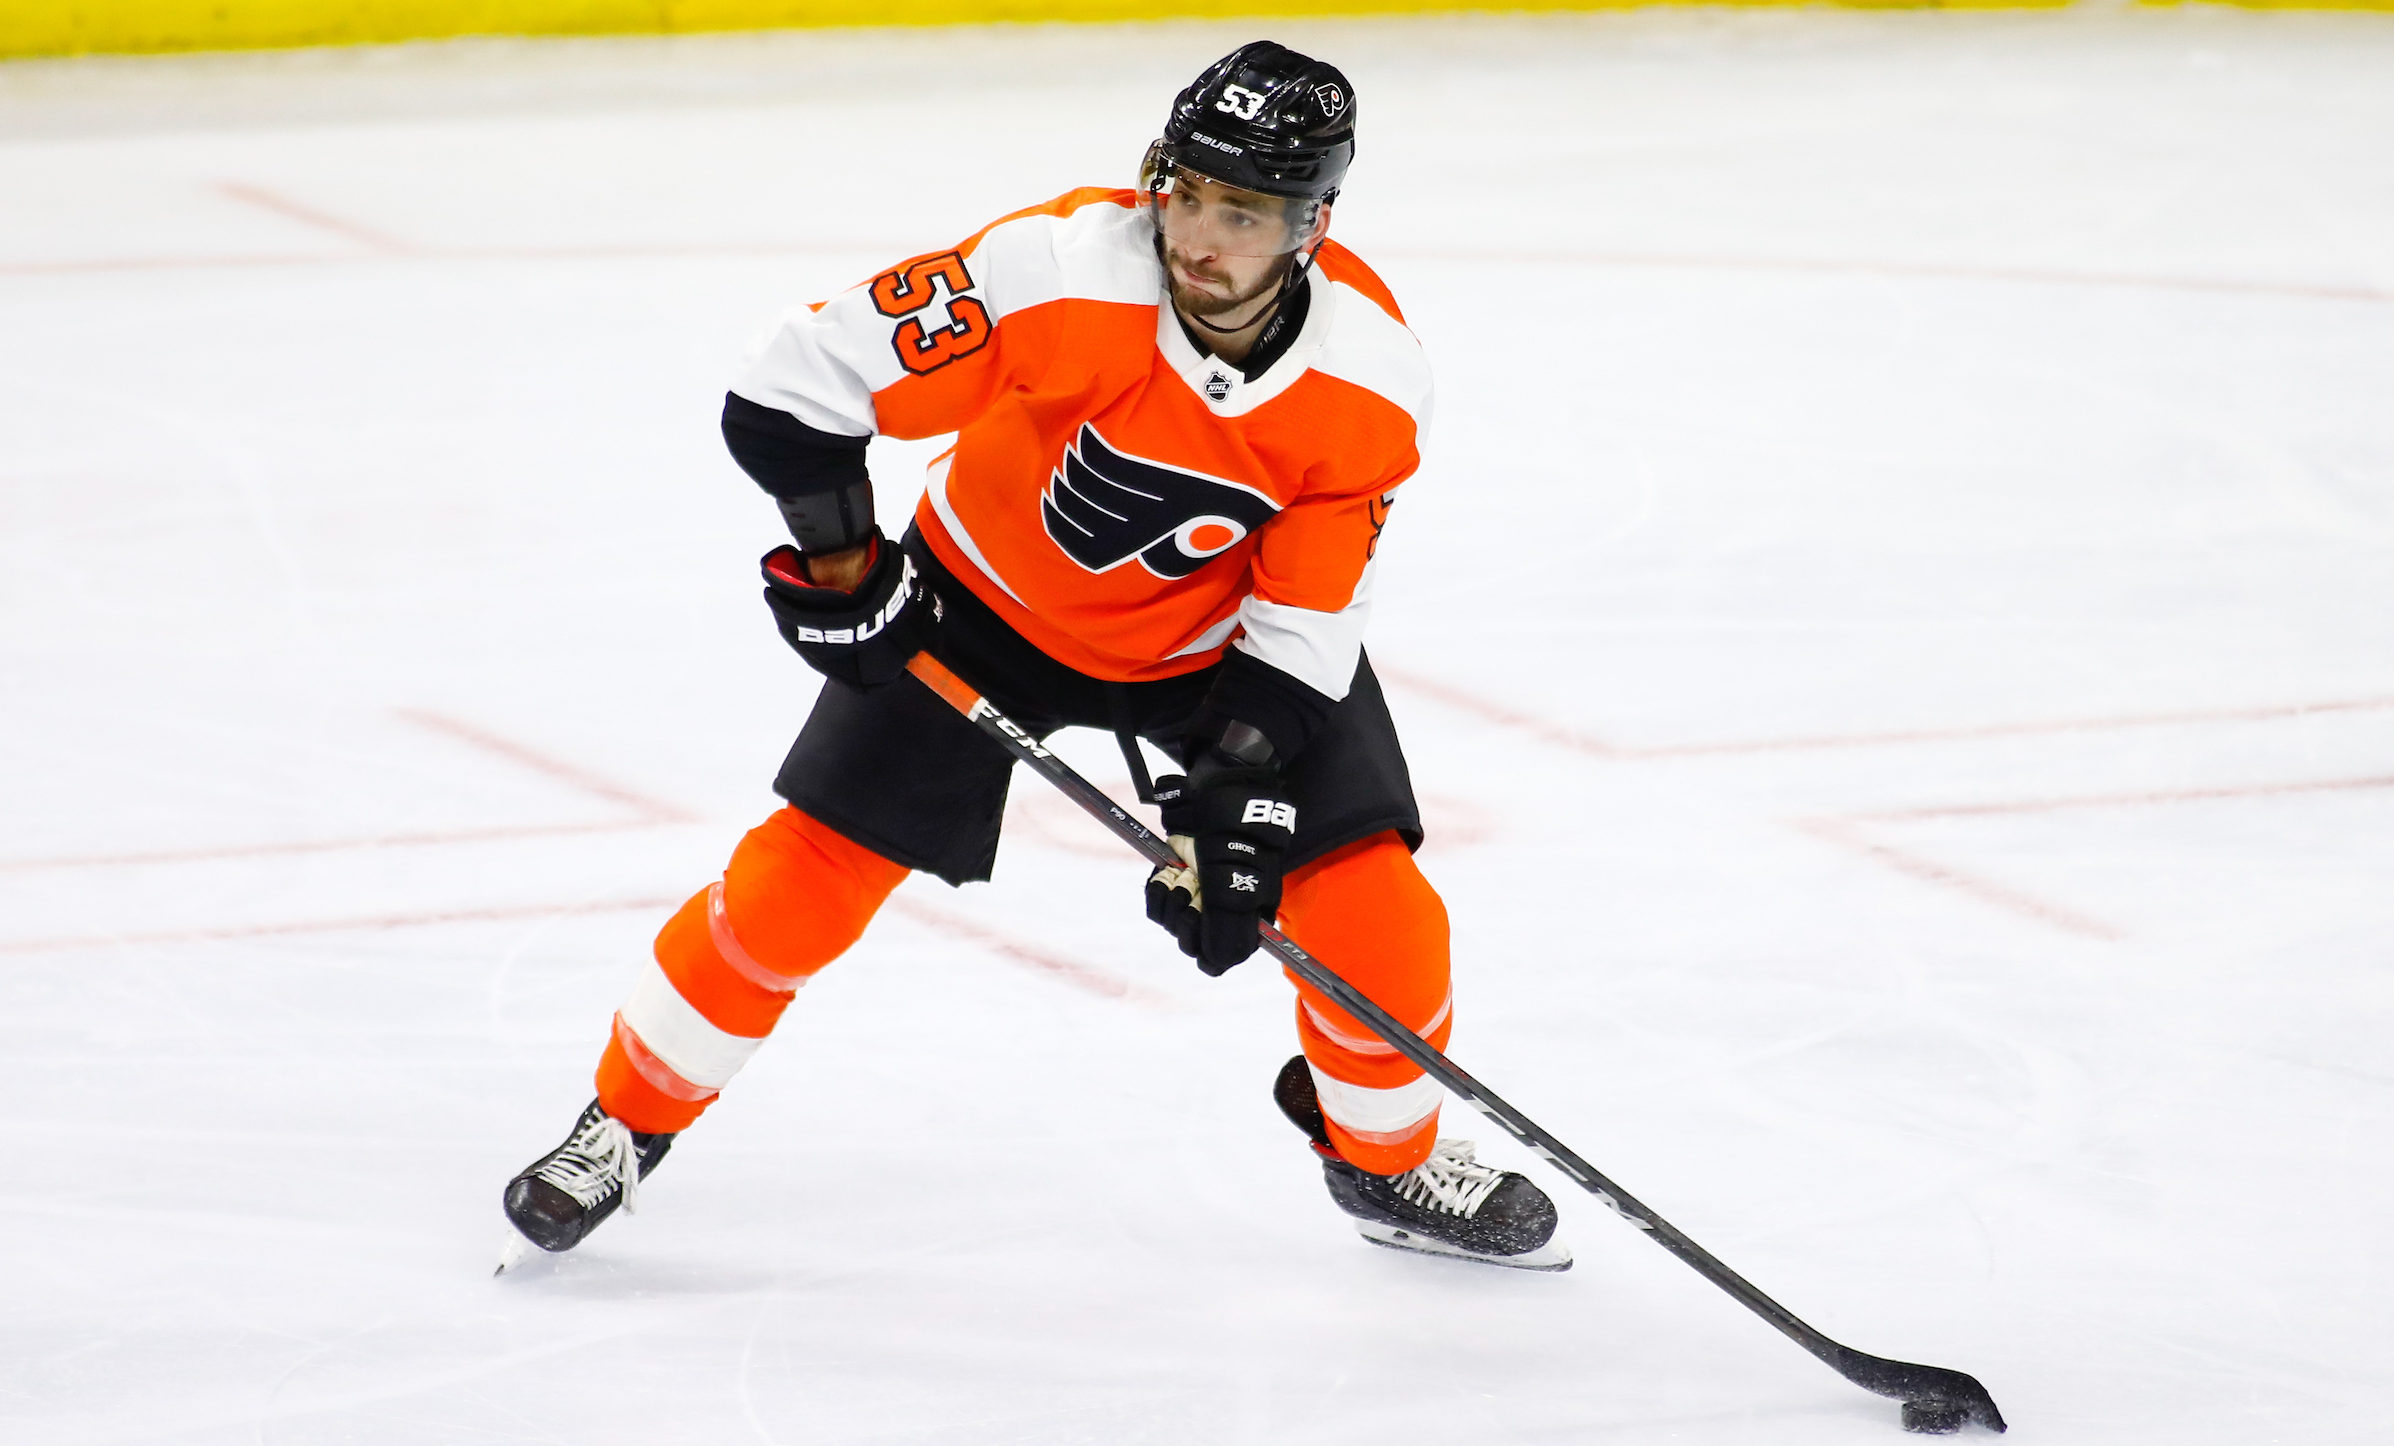 Coyotes send Gostisbehere to Hurricanes